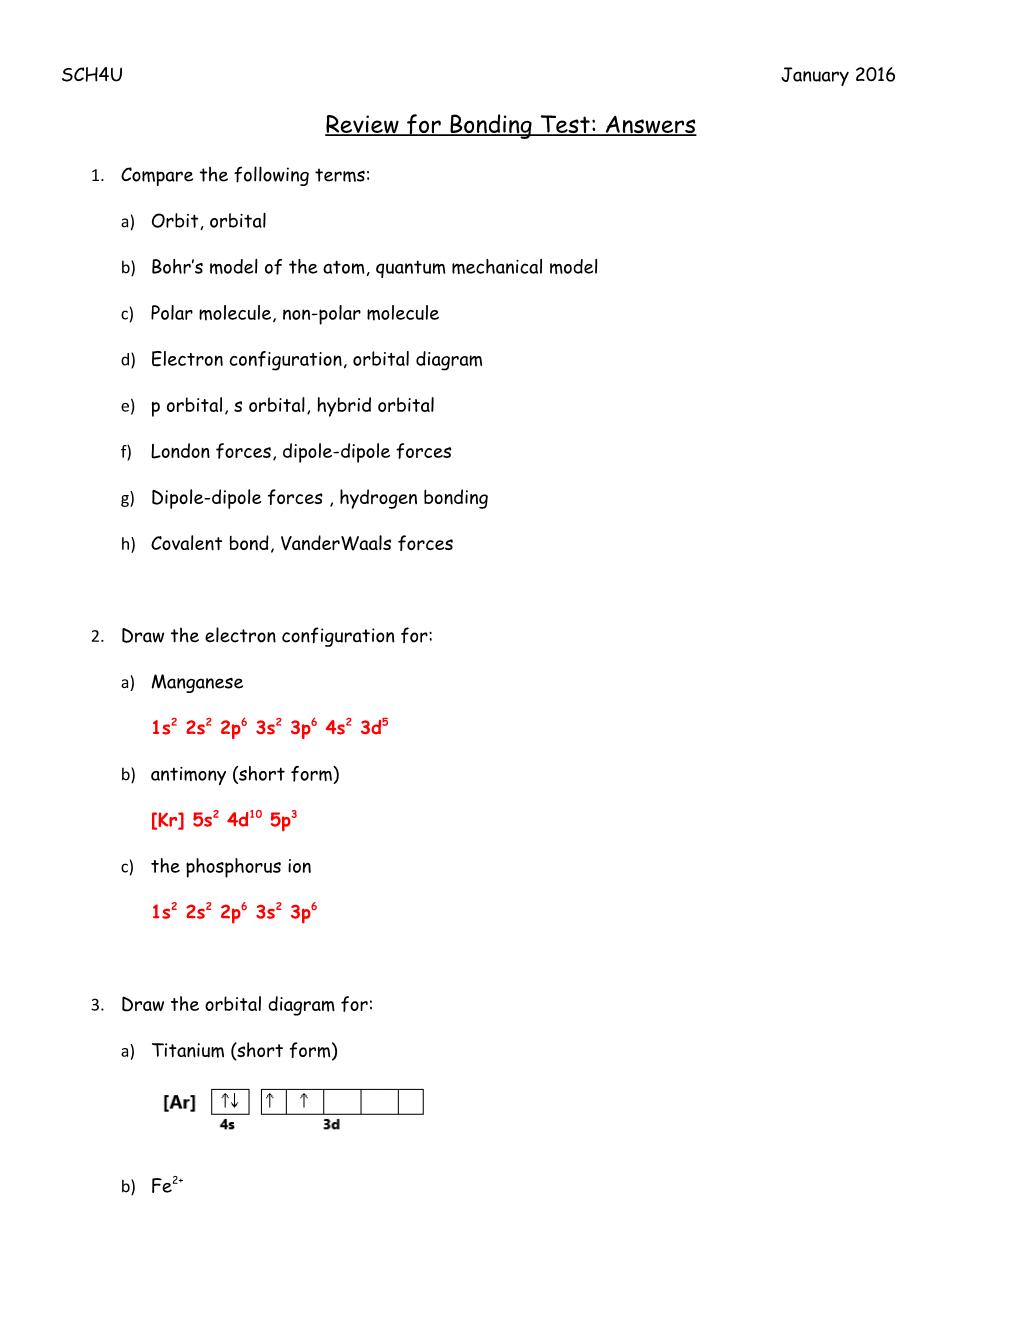 Review for Bonding Test: Answers